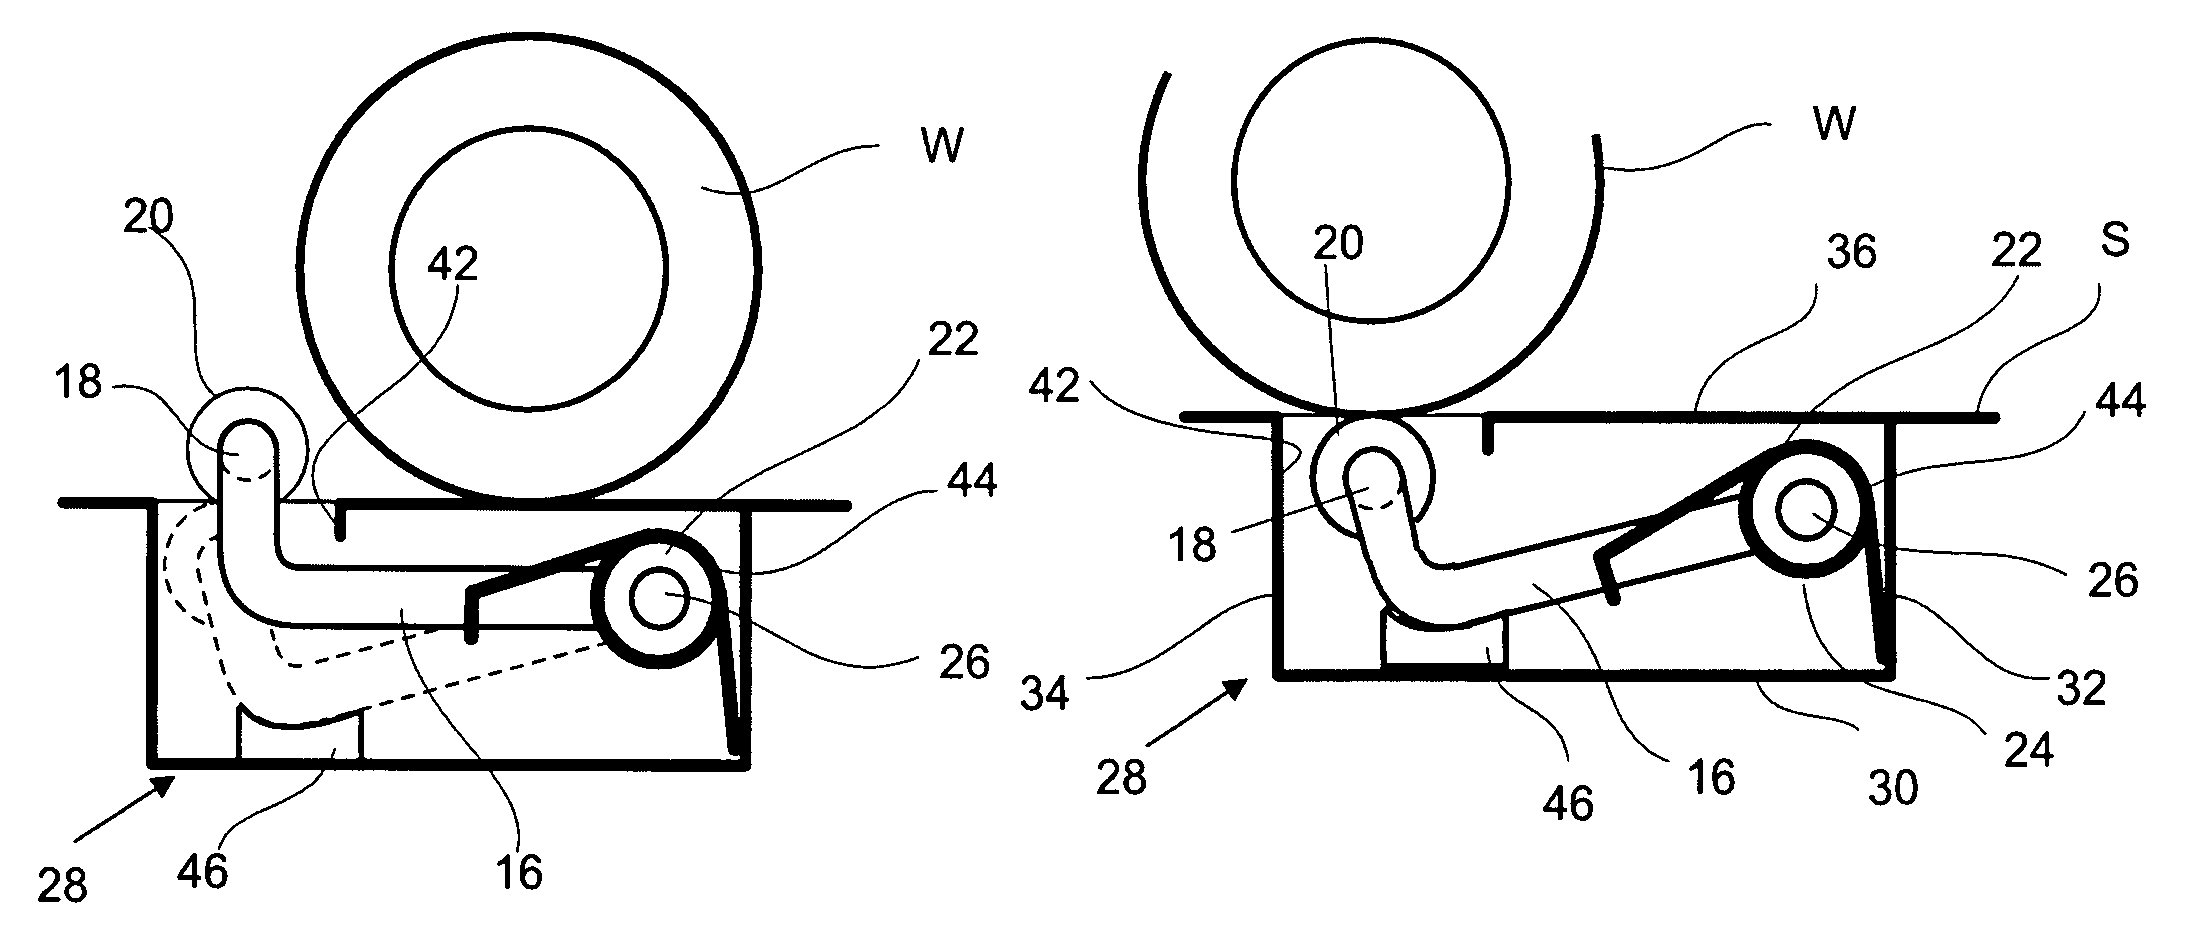 Road vehicle actuated energy device